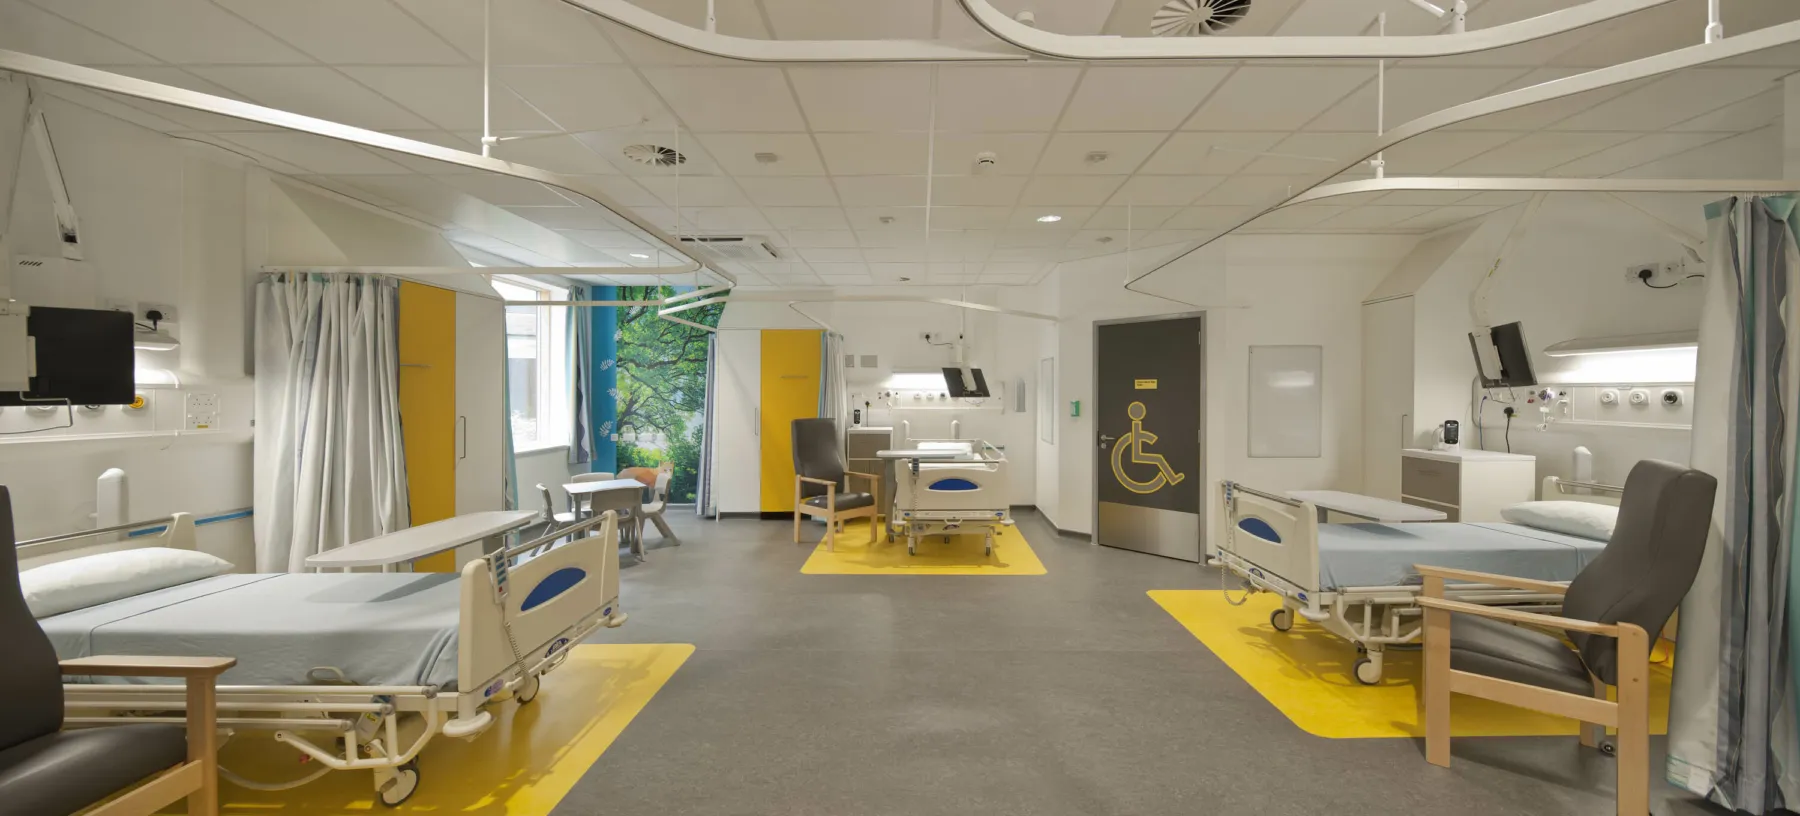 In one of the wards at the Royal Hospital for Sick Children, Edinburgh.  Three beds are arranged with space around them and chairs for visitors. The floor is coloured yellow underneath the beds and some wall murals add interest to the space.